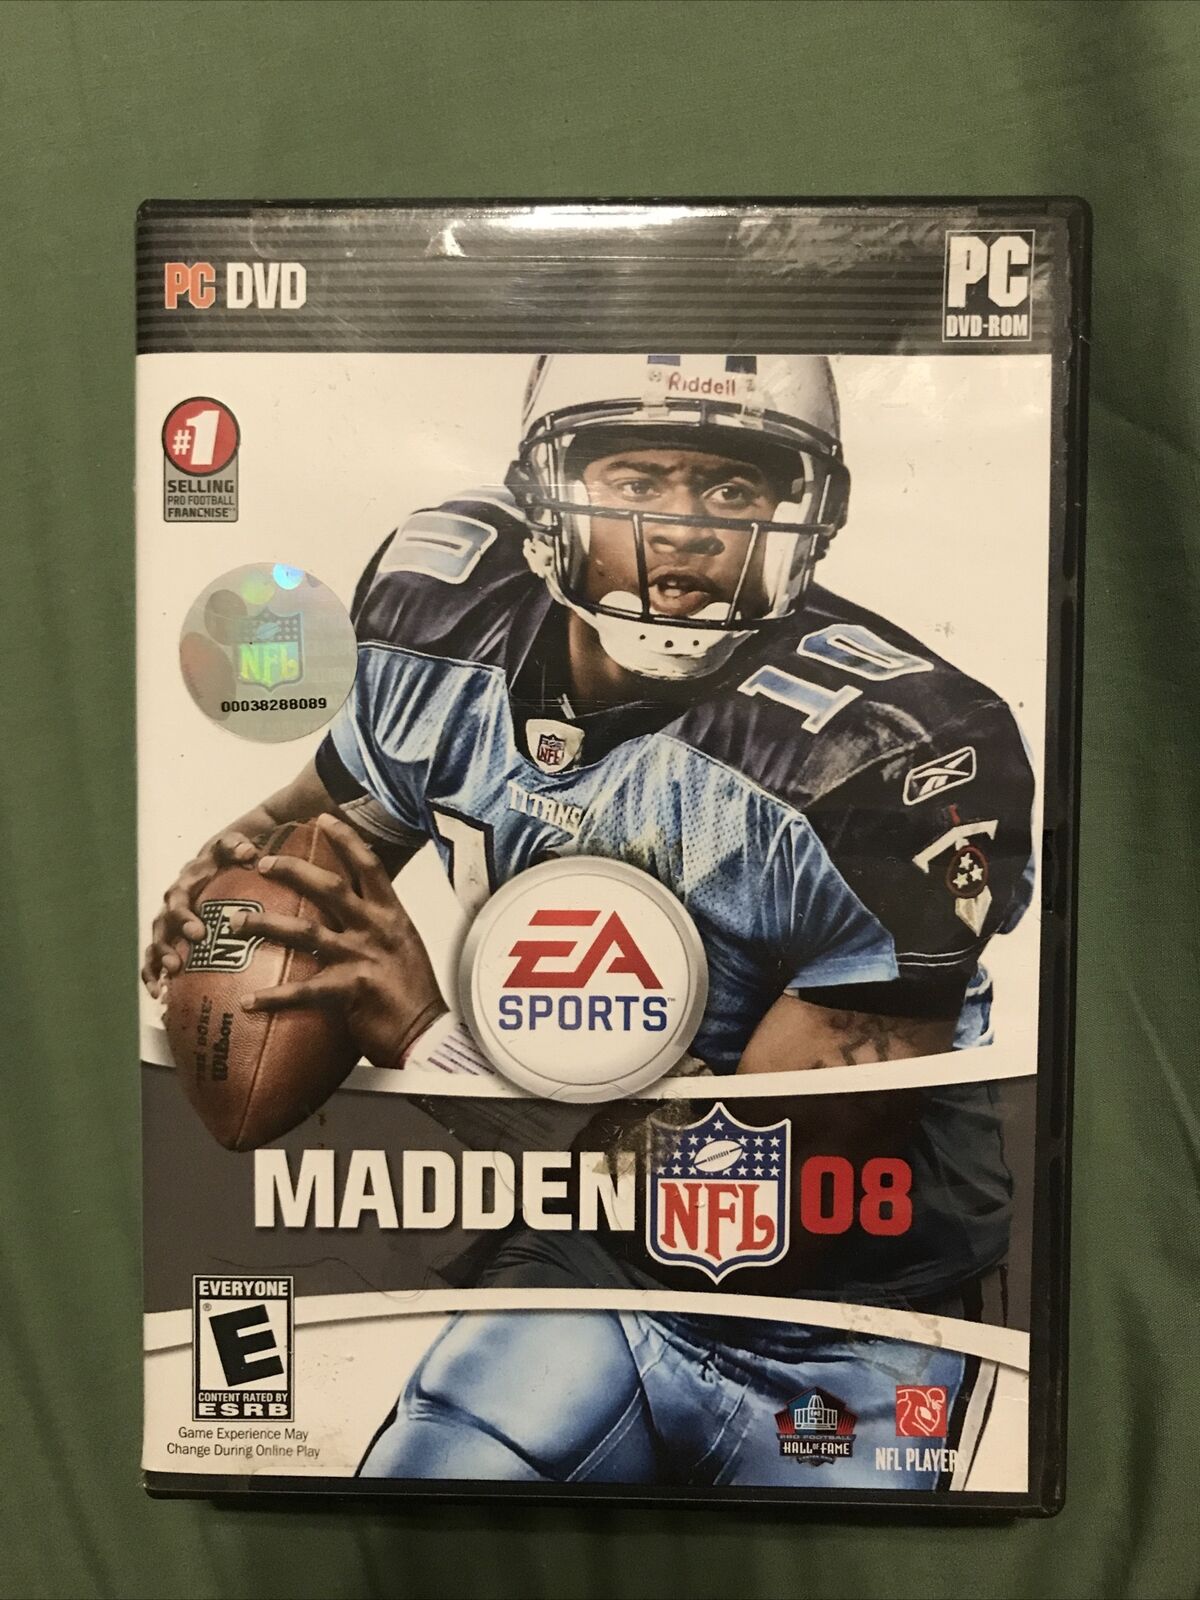 Madden NFL 08 PC DVD professional football league team players sports game 2008